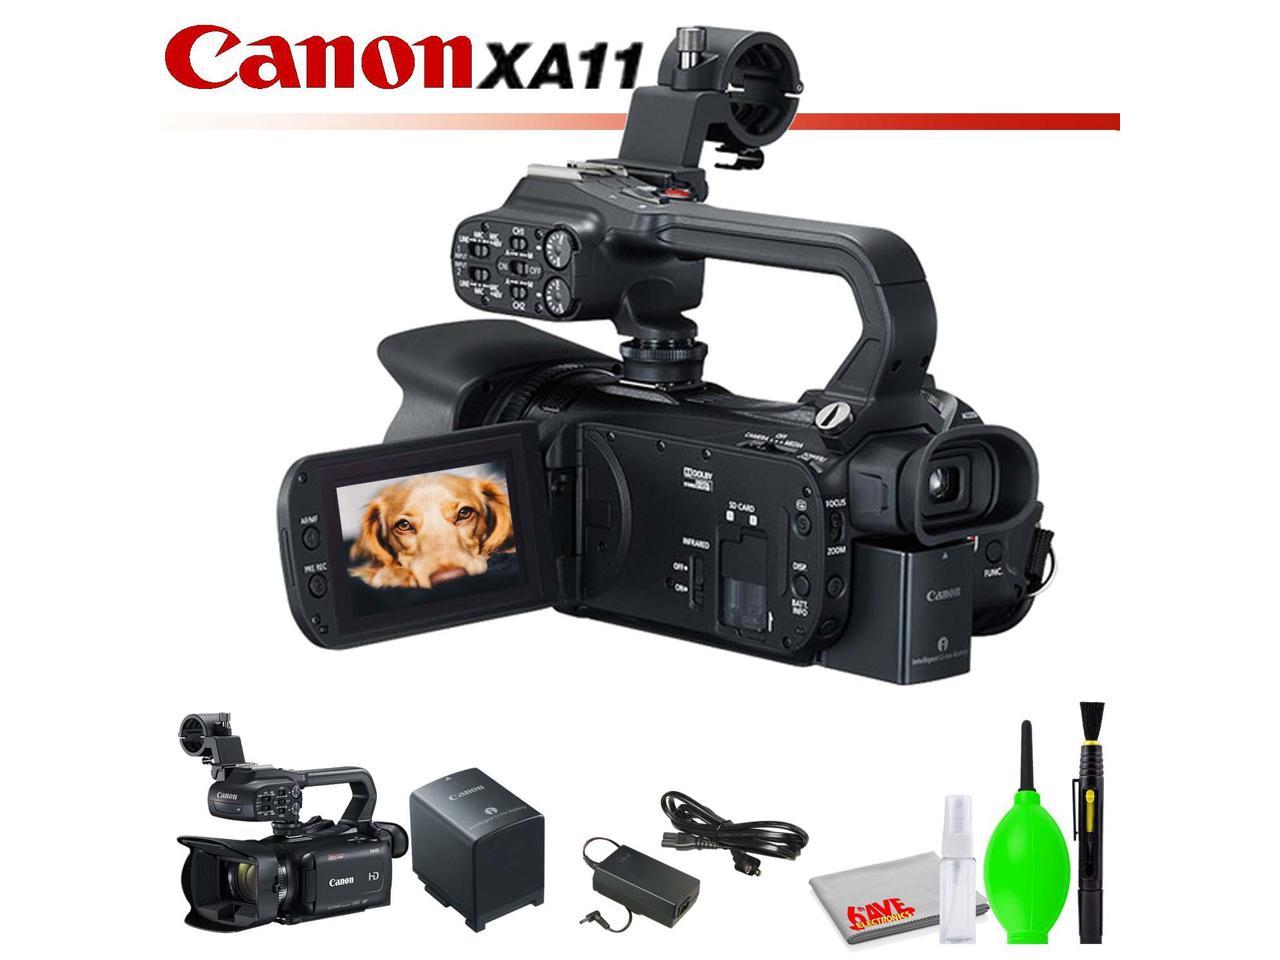 Canon XA11 Compact Full HD Camcorder with HDMI and Composite Output (PAL) with Cleaning Kit